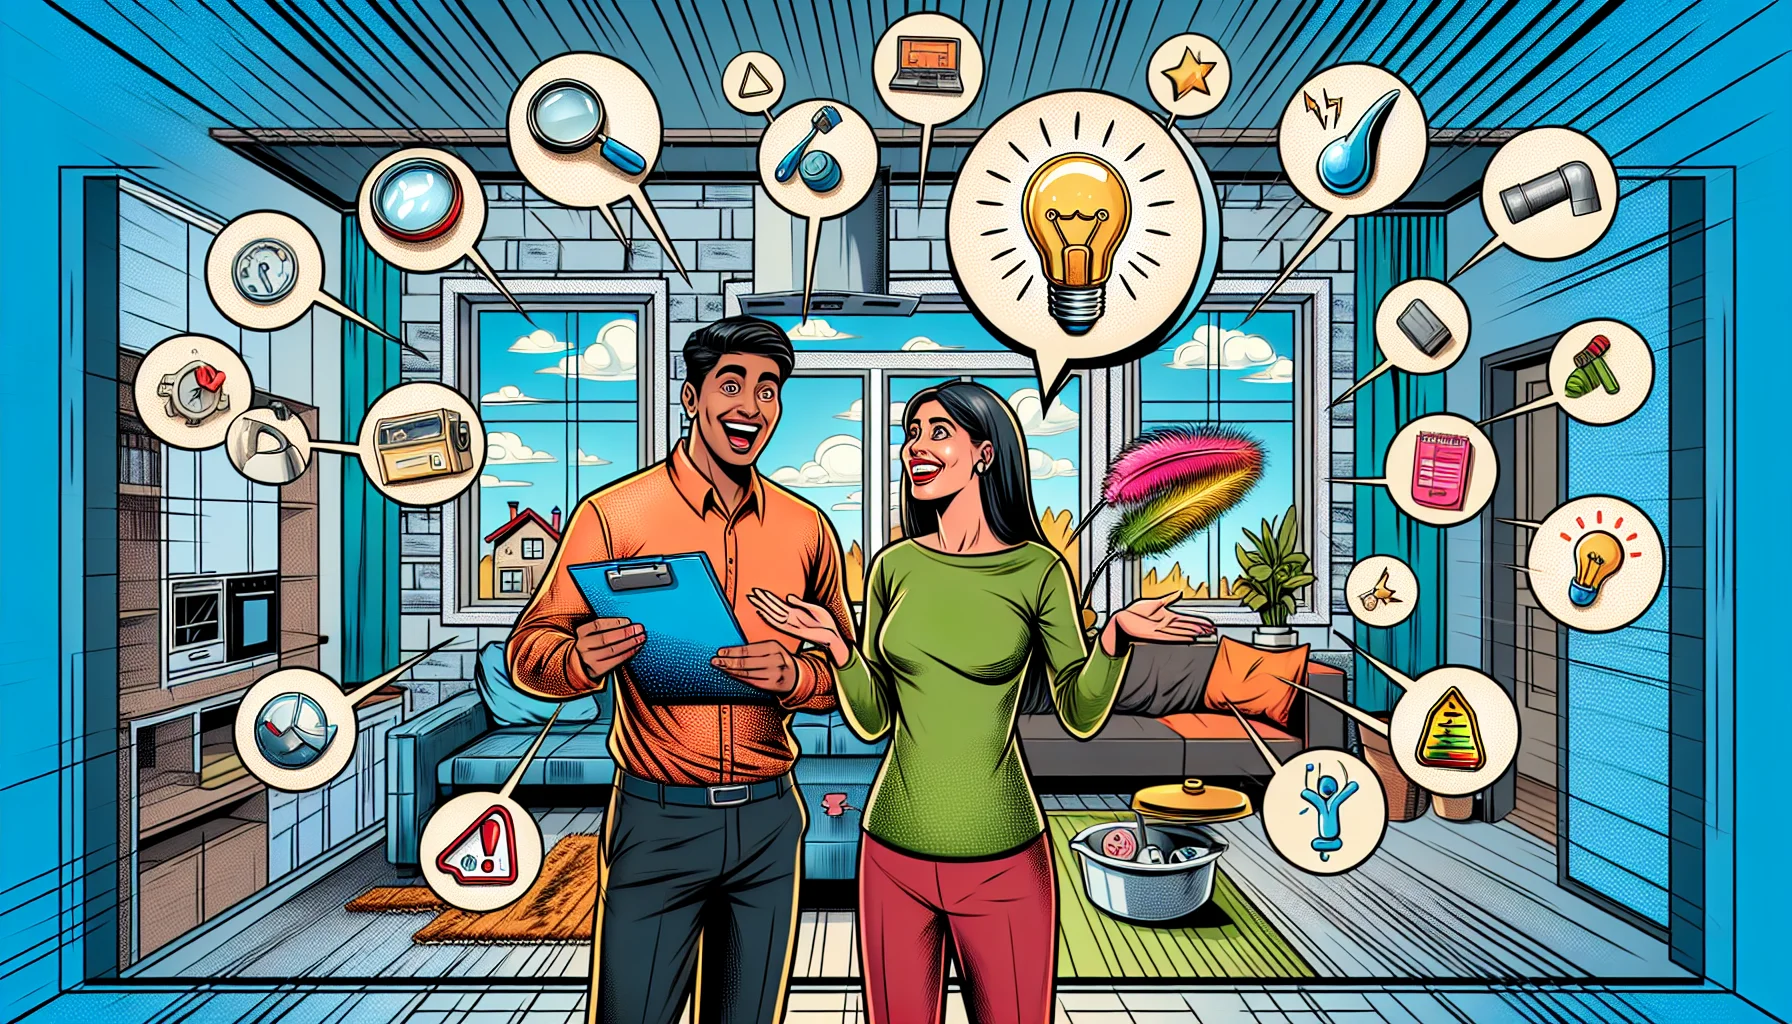 Imagine a delightfully humorous scene depicting a perfect scenario for a home inspection in the context of real estate. The image features a joyful Middle Eastern female realtor presenting various areas of a pristine modern house to an ecstatic South Asian male home inspector. Overhead, there are floating drawn symbols and signs to represent tips: a magnifying glass hovering over the plumbing, a checklist over the electrical panel, a feather duster near clean surfaces, an energy-saving lightbulb in the living area. The vibrant colors of the house contrast with the pop-up comic-style speech bubbles indicating the inspector's praises.